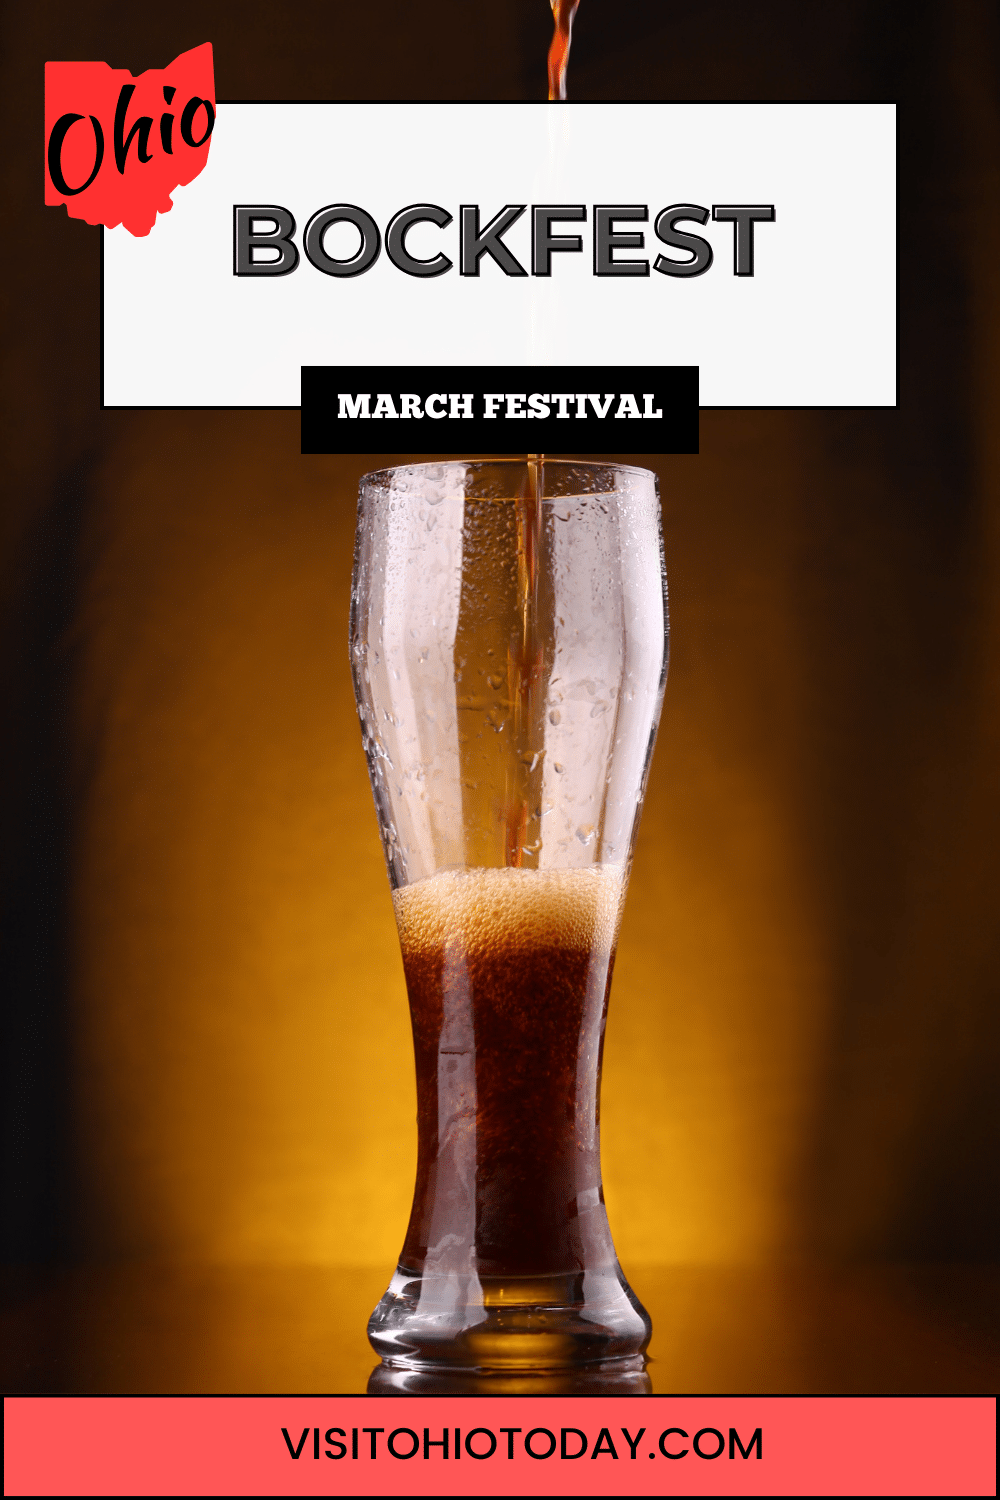 Bockfest is a community festival that takes place in early March at Cincinnati’s Over the Rhine region.